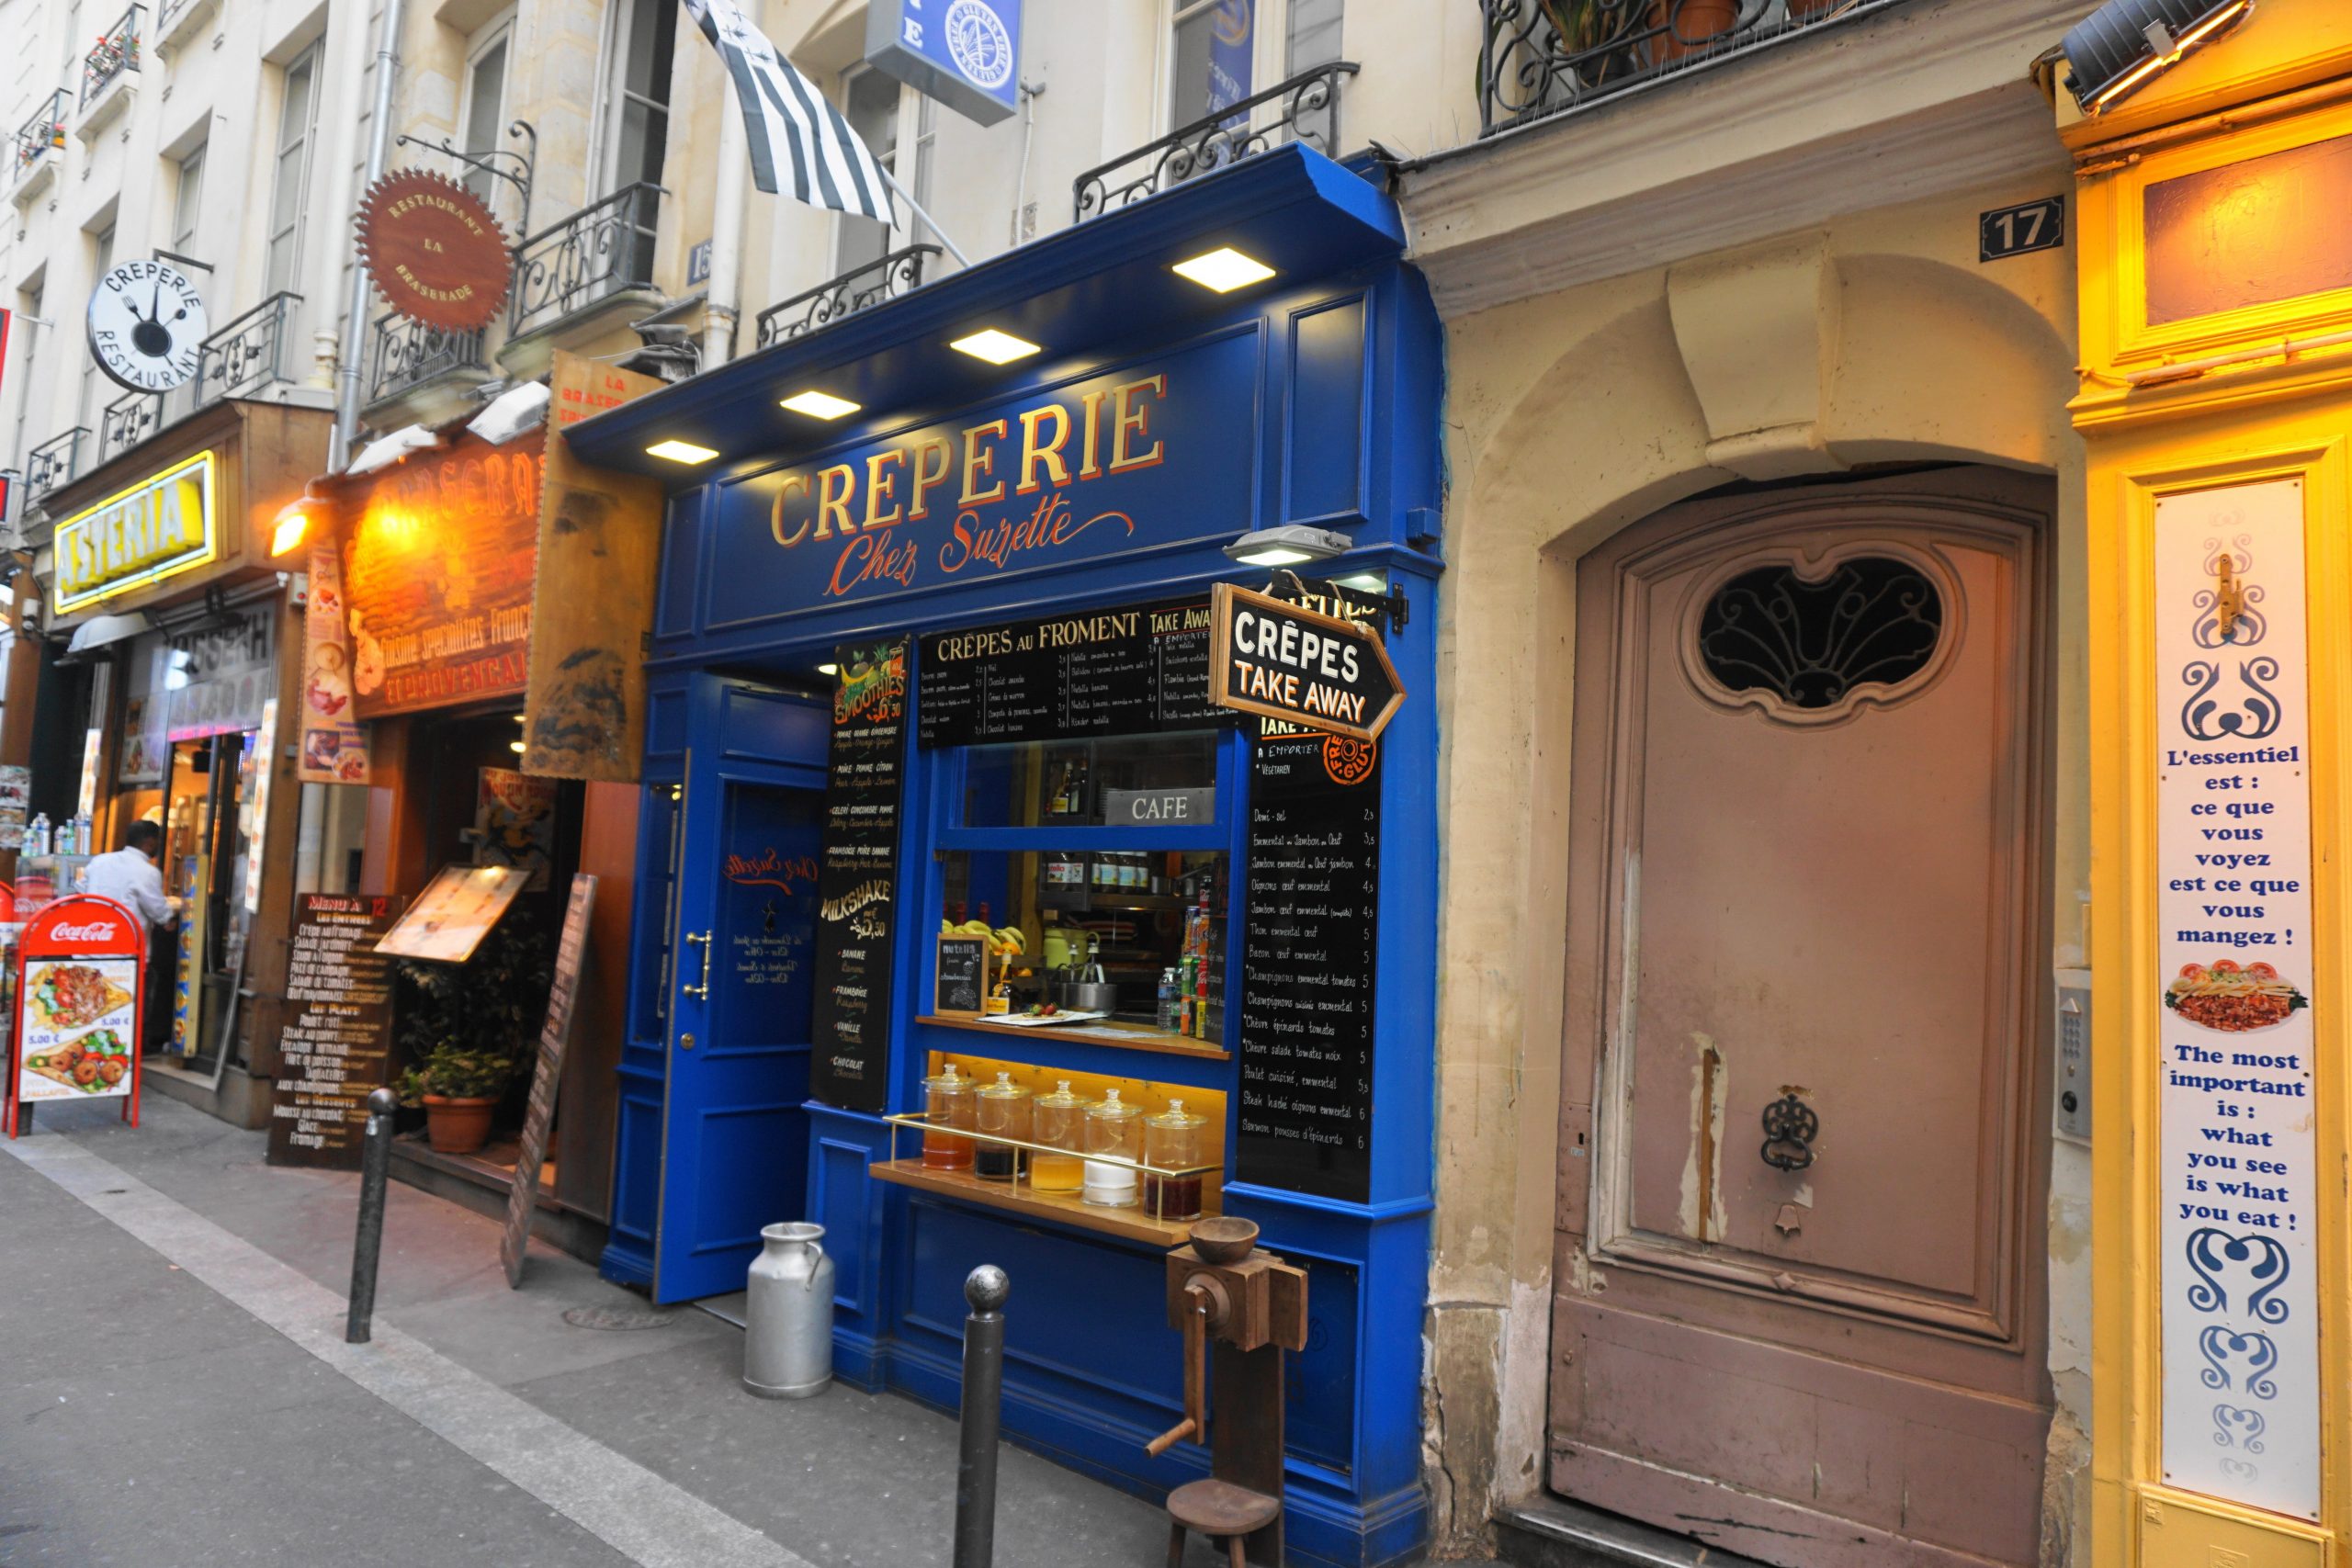 Rue St Severin creperie shop